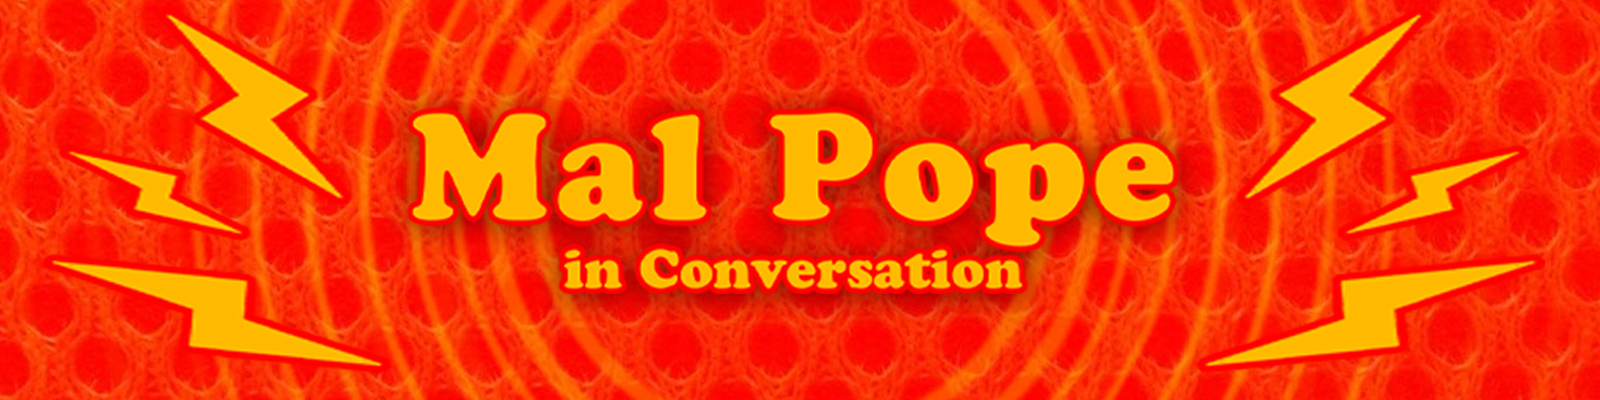 Mal Pope in Conversation